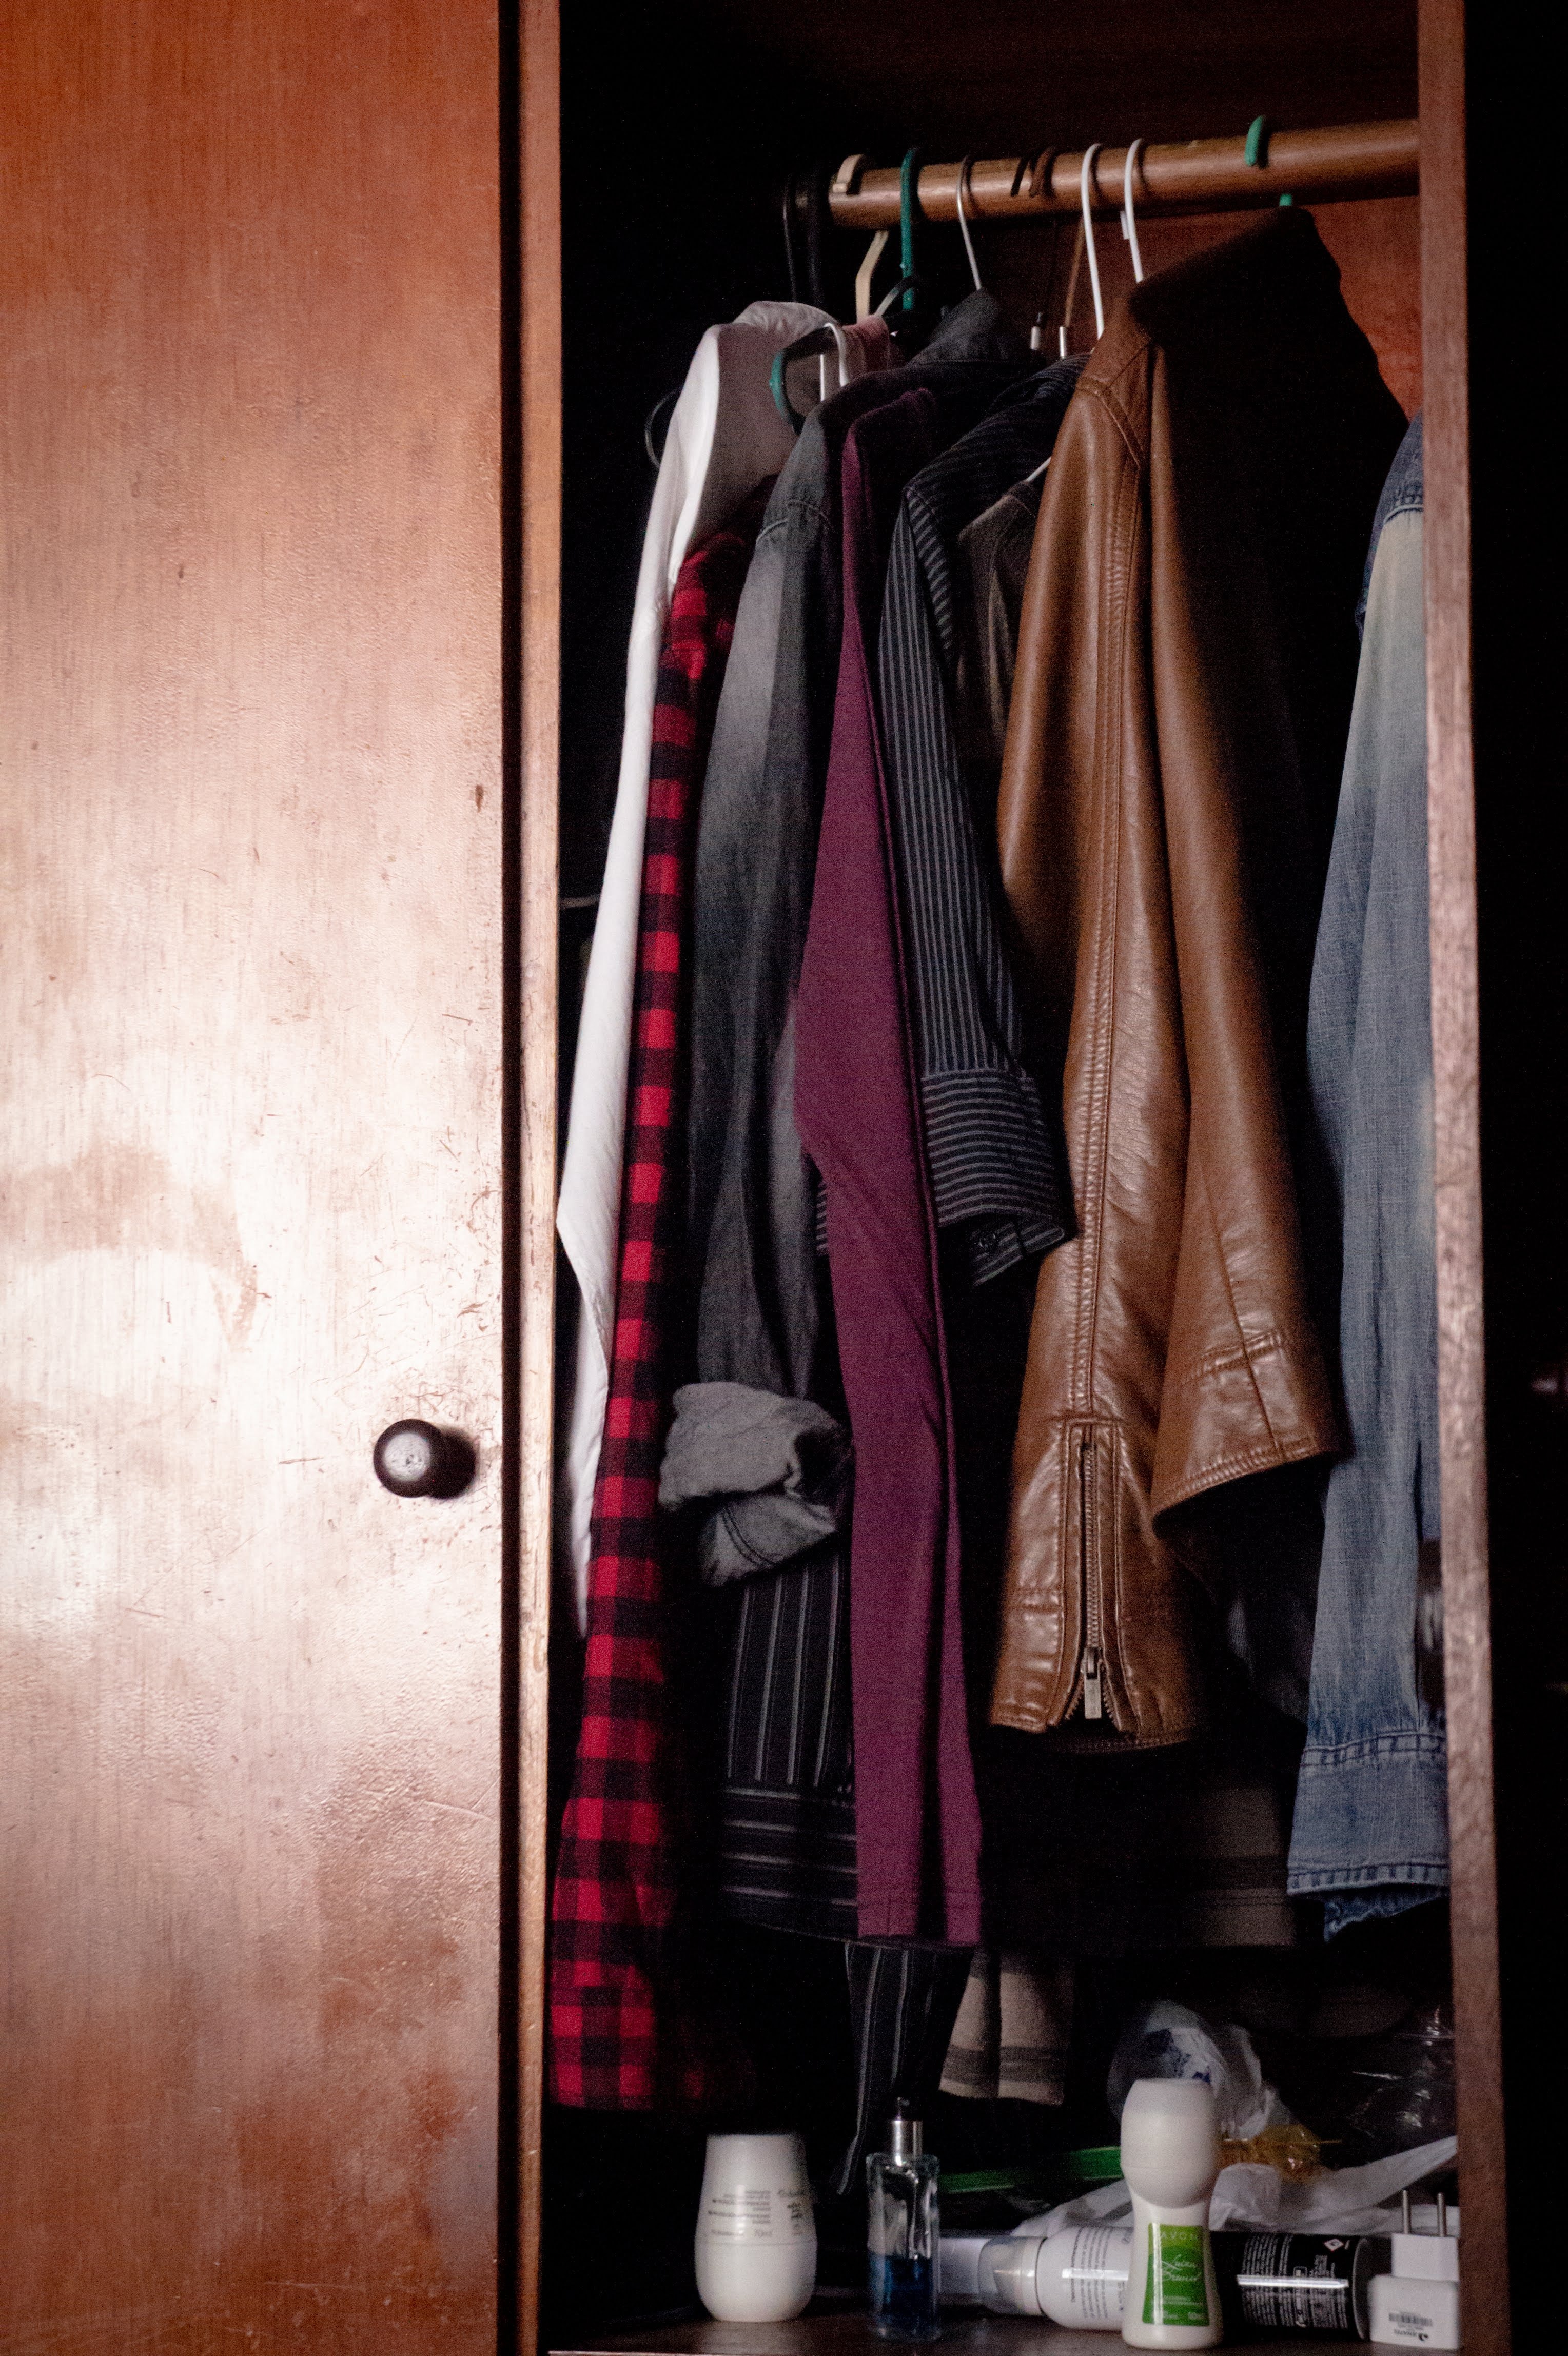 Wardrobe with casual clothes on hangers